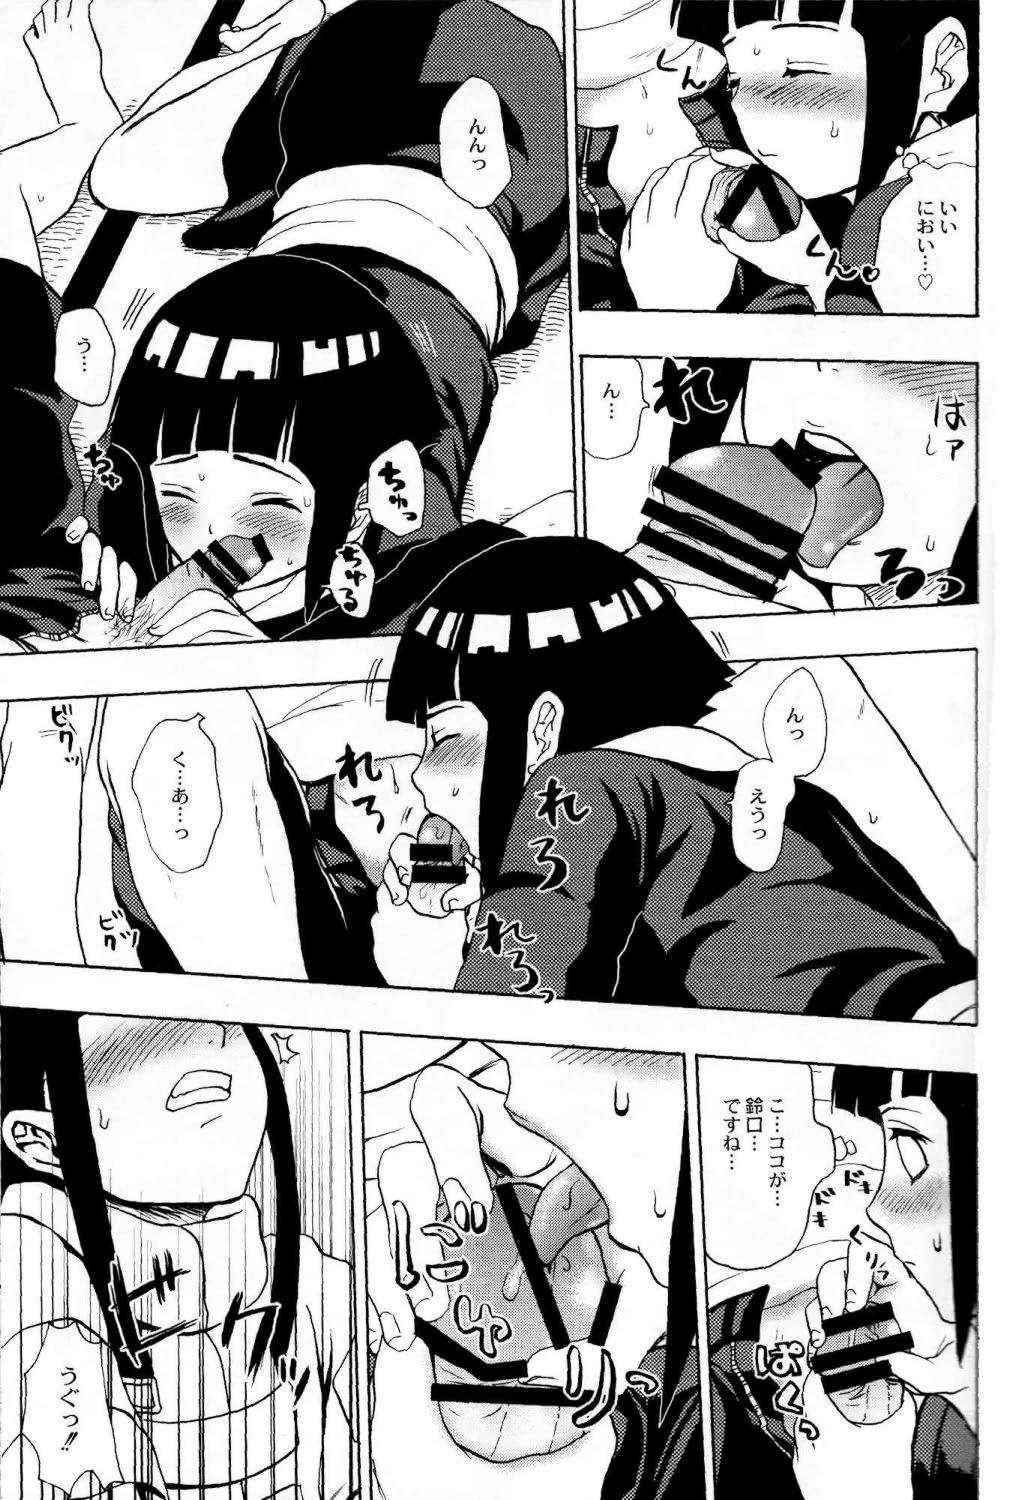 18 Year Old Porn Ie de Nii-san to - Naruto Suckingcock - Page 10